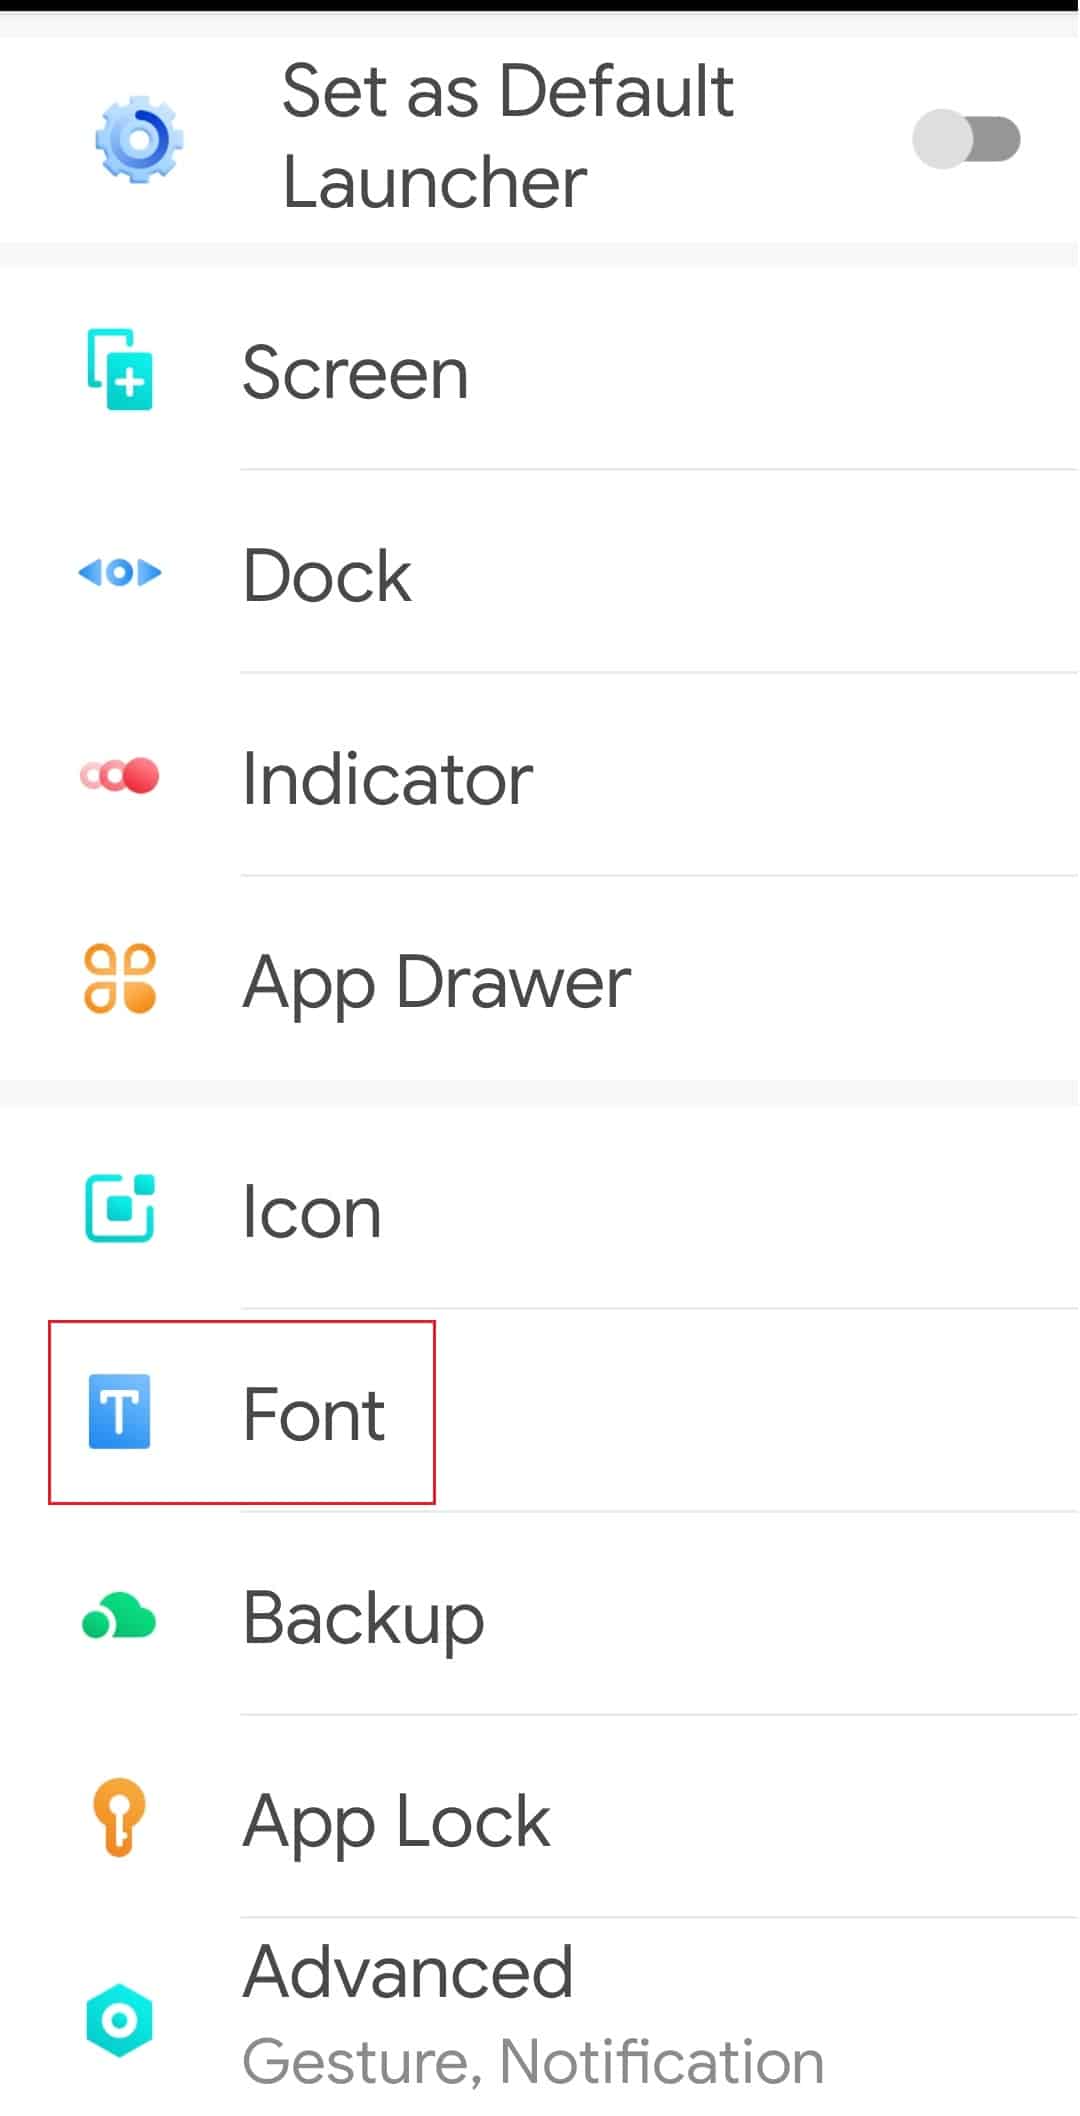 tap on Font setting in Go launcher settings